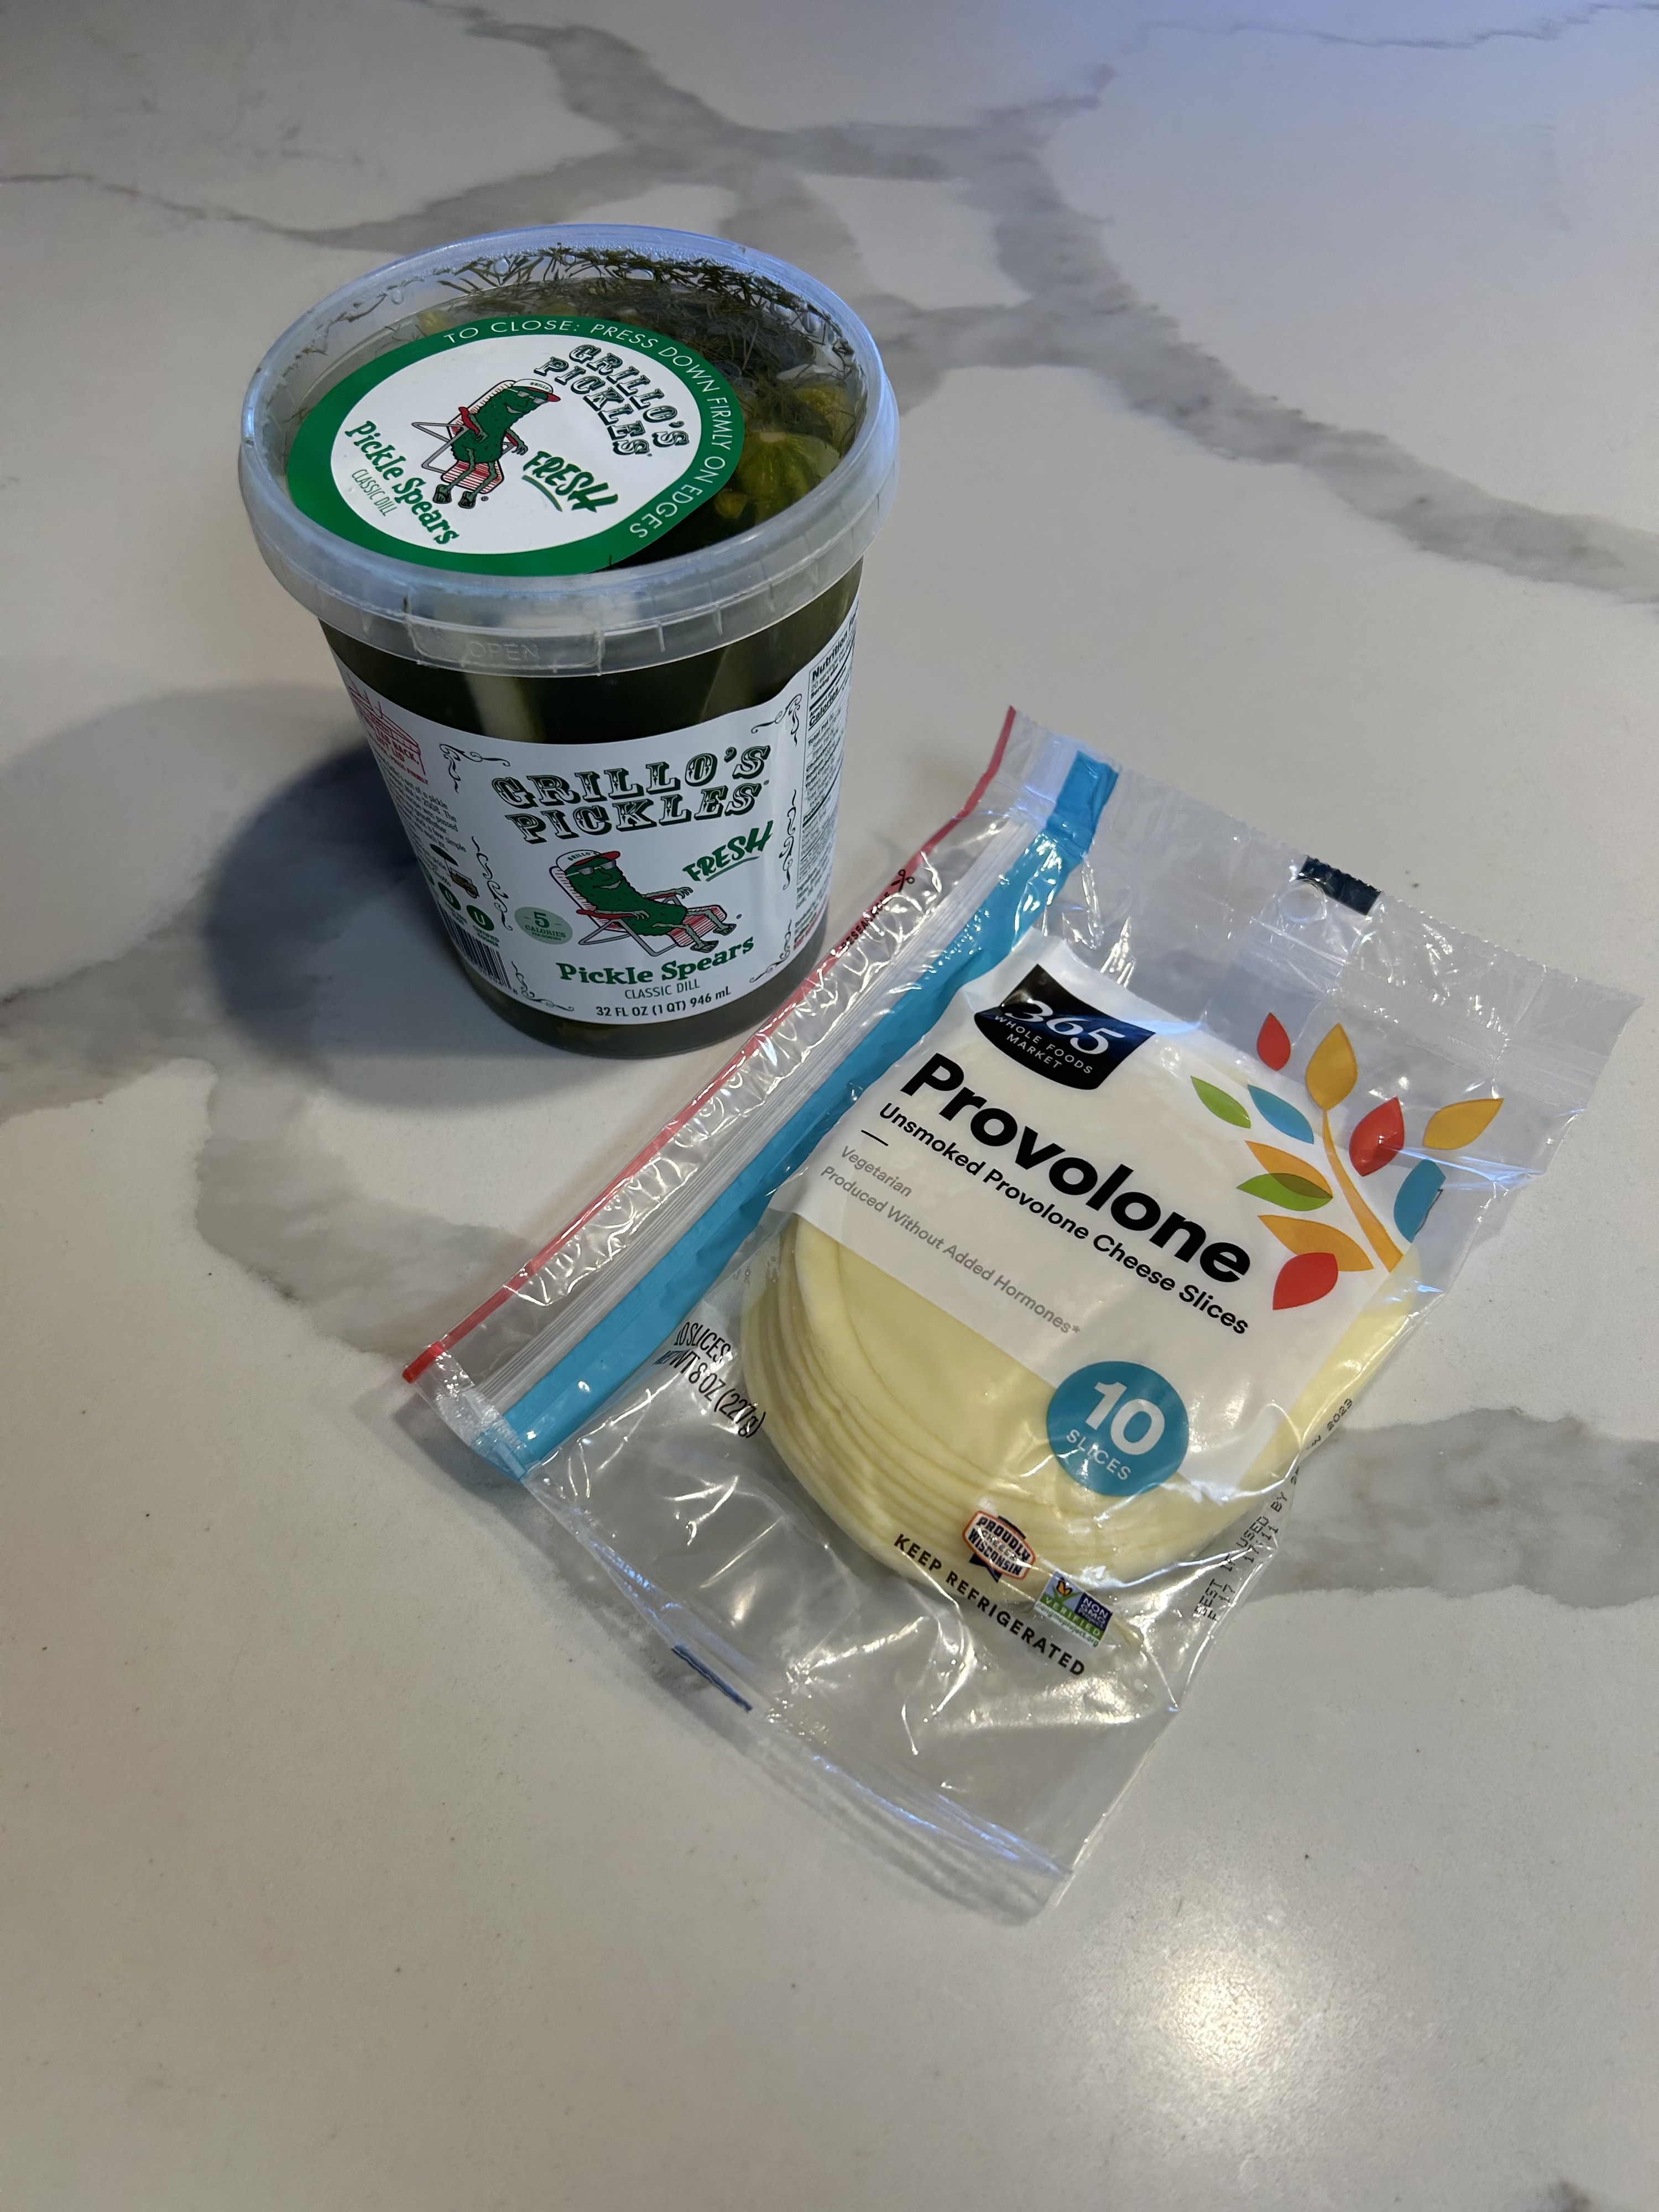 A container of pickles and a package of provolone on a kitchen counter